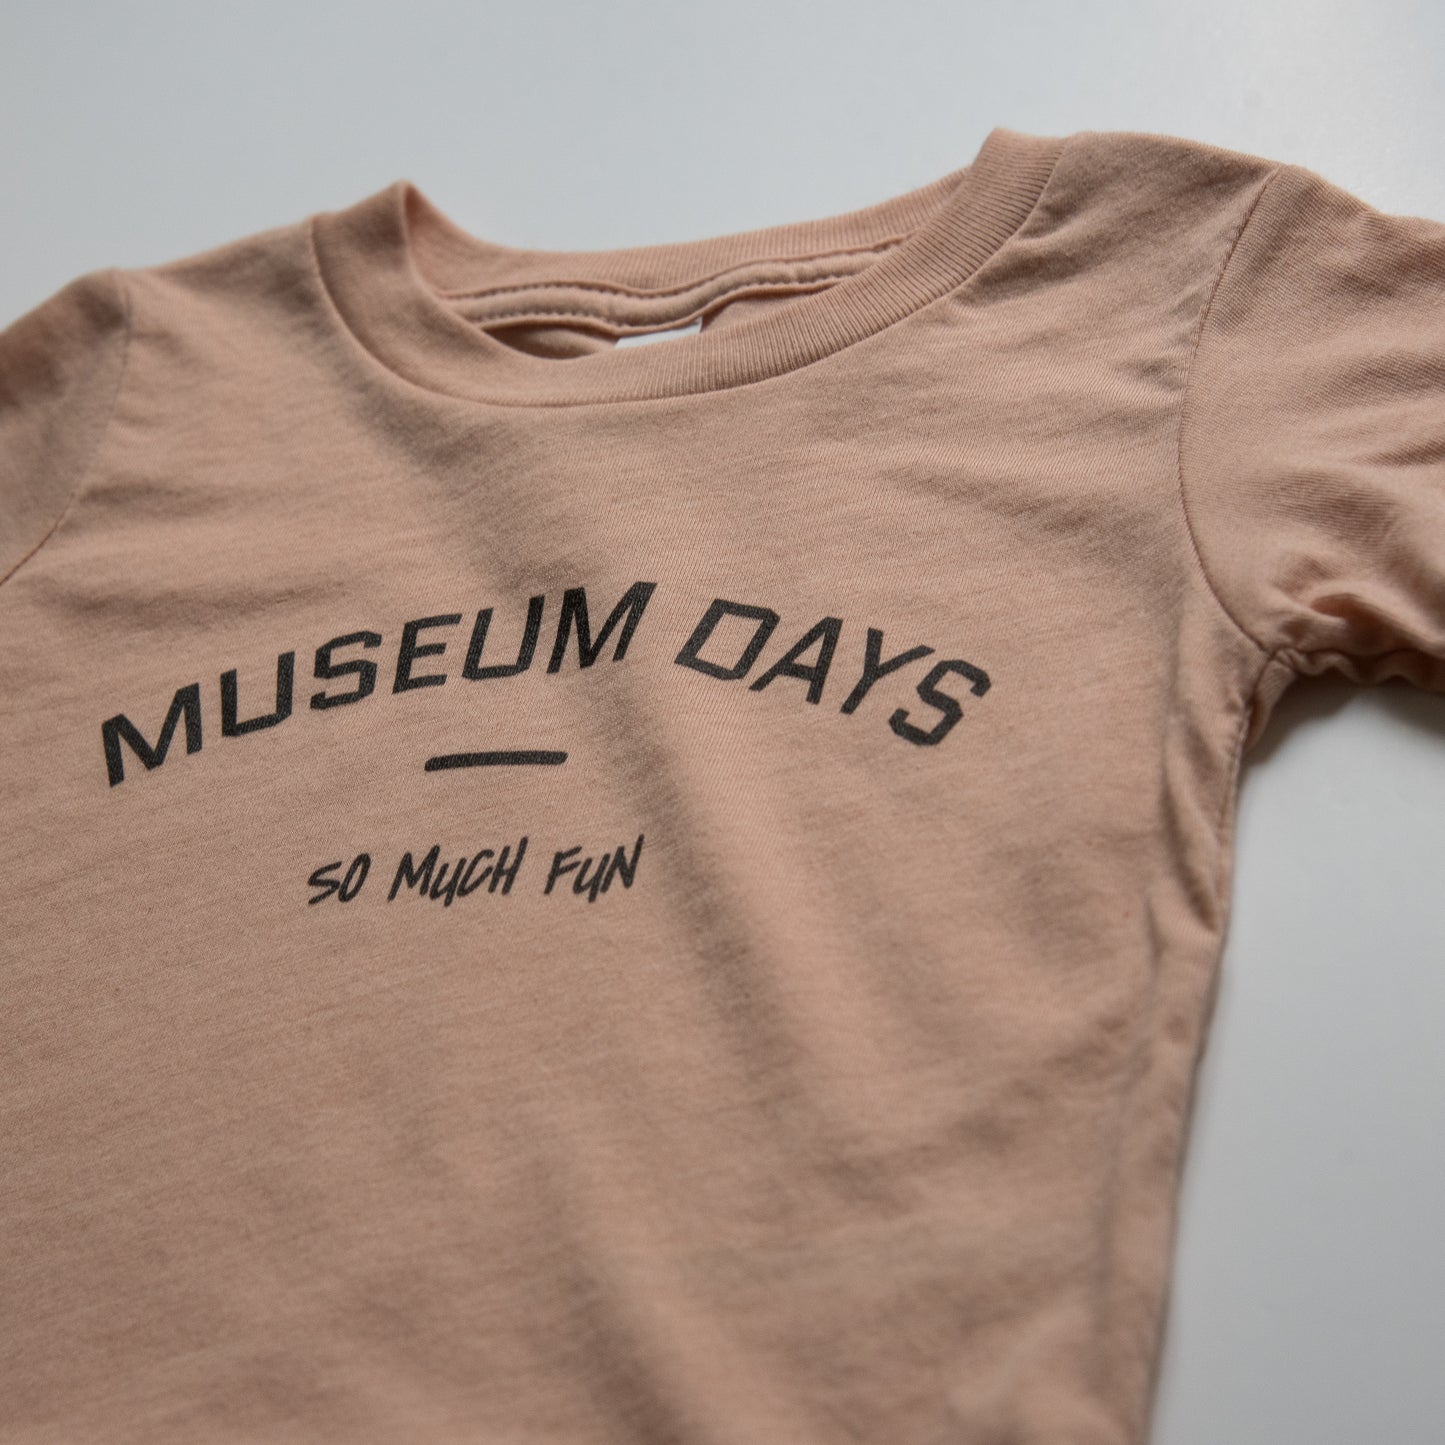 MUSEUM DAYS SO MUCH FUN - Short Sleeve Baby Tee - 3 COLORS! - Little Mate Adventures 